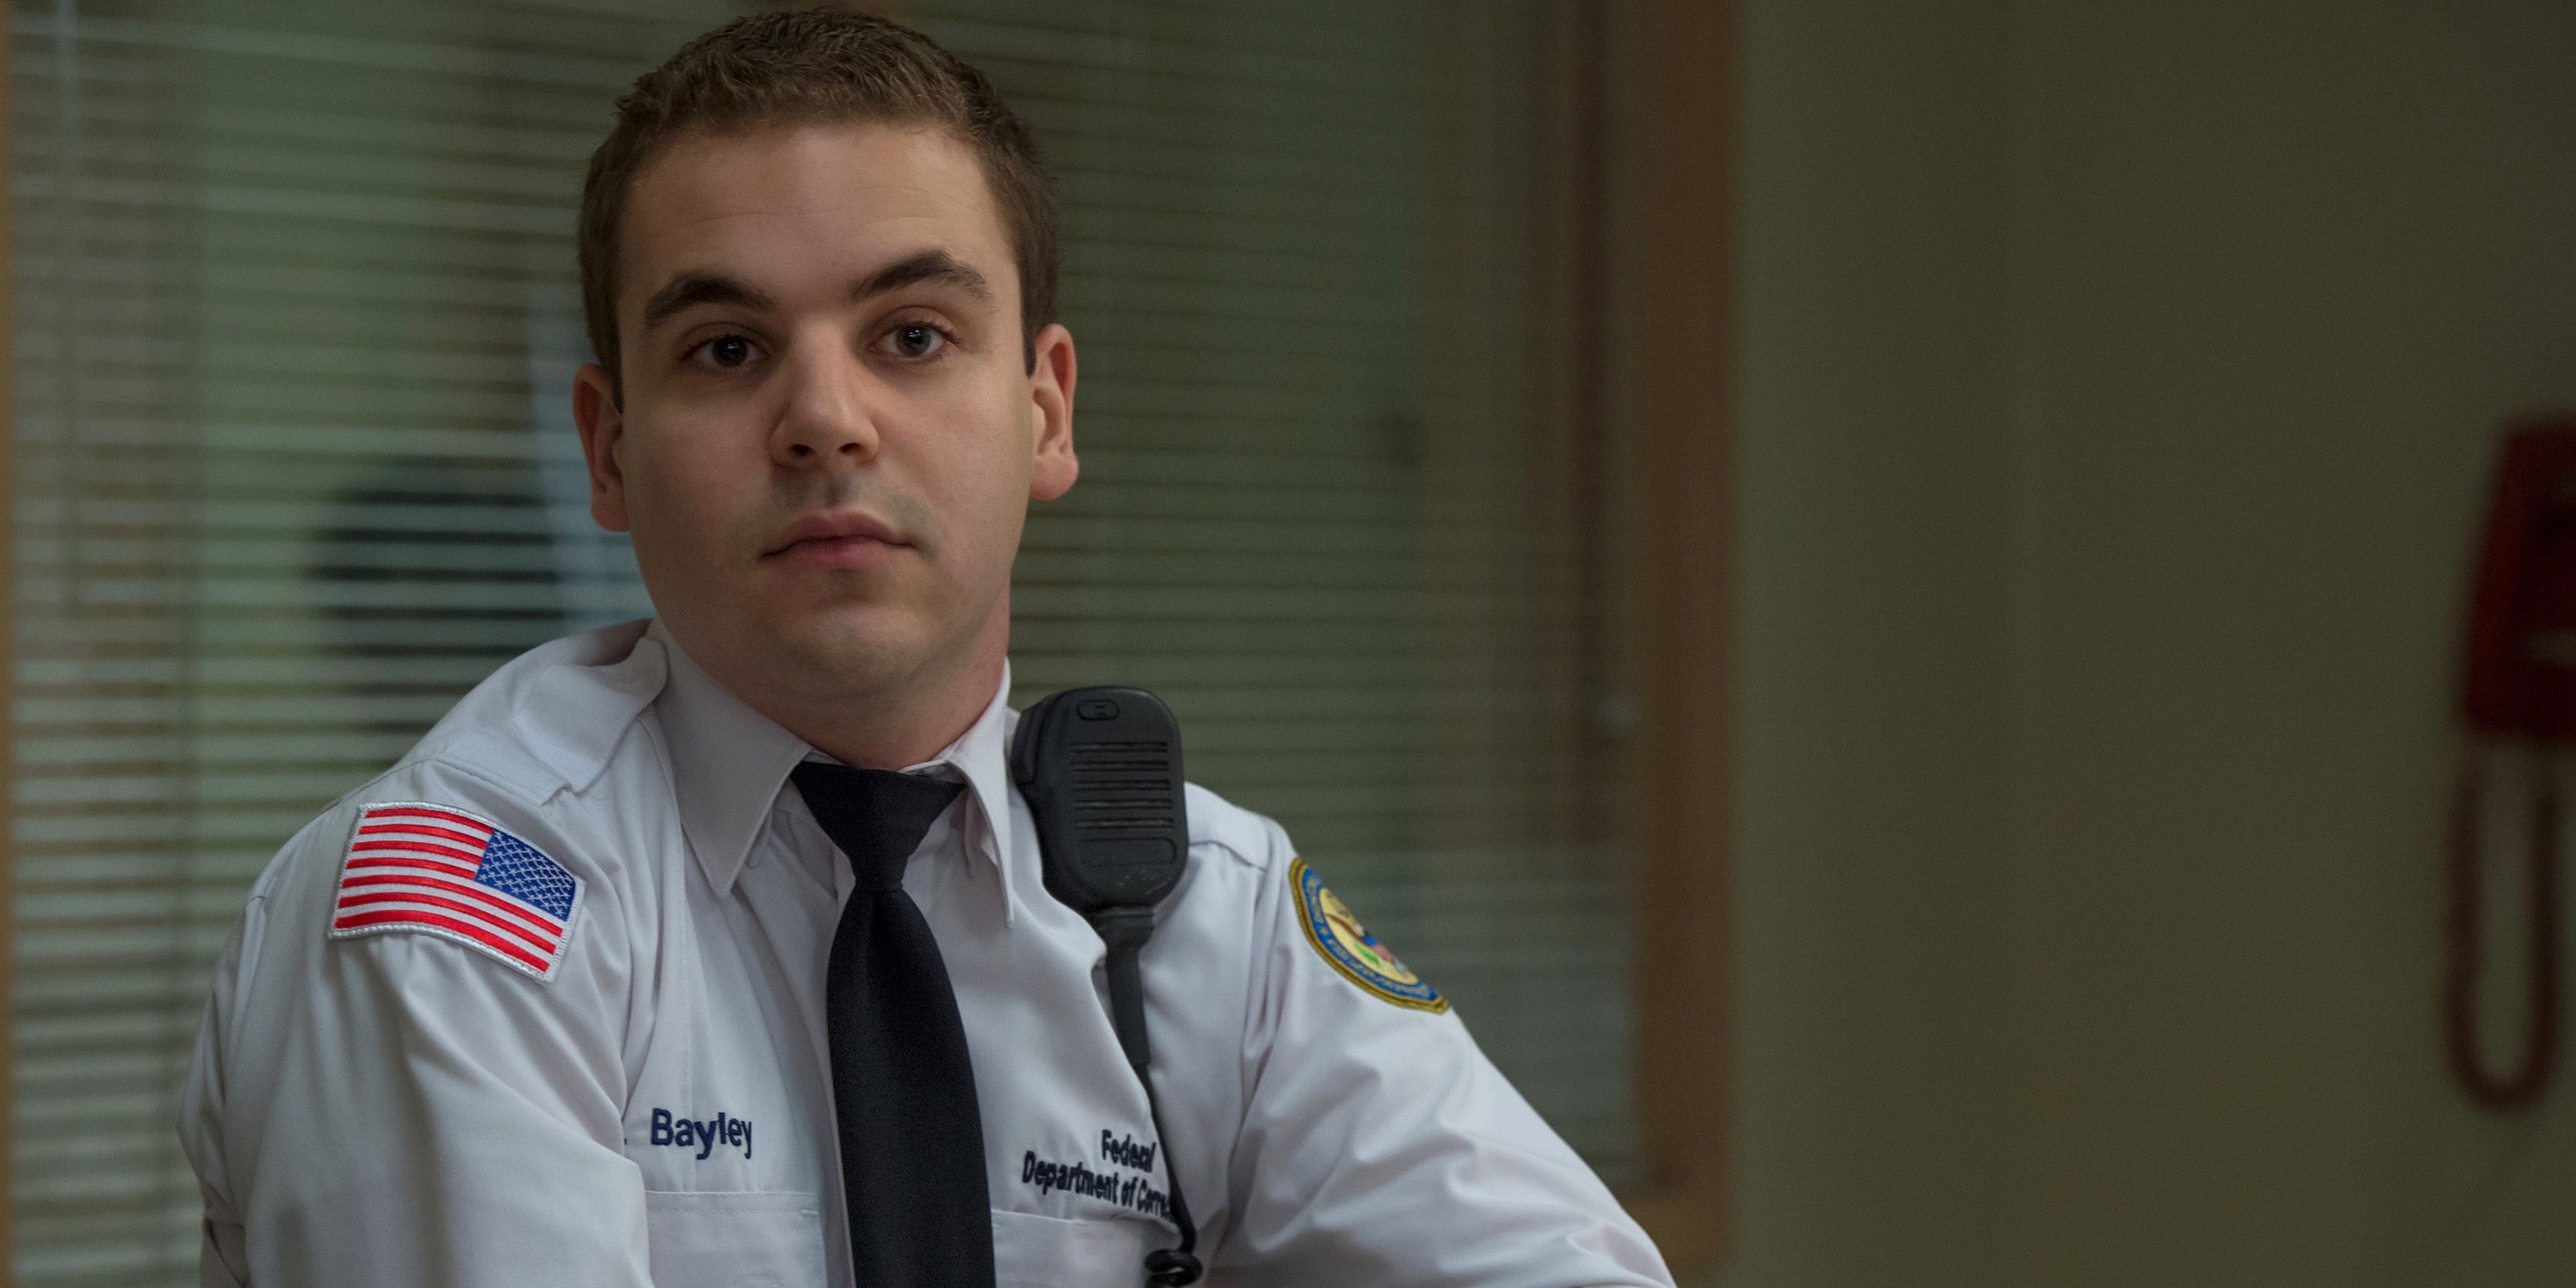 Alan Aisenberg as Baxter Bayley in Orange is the New Black